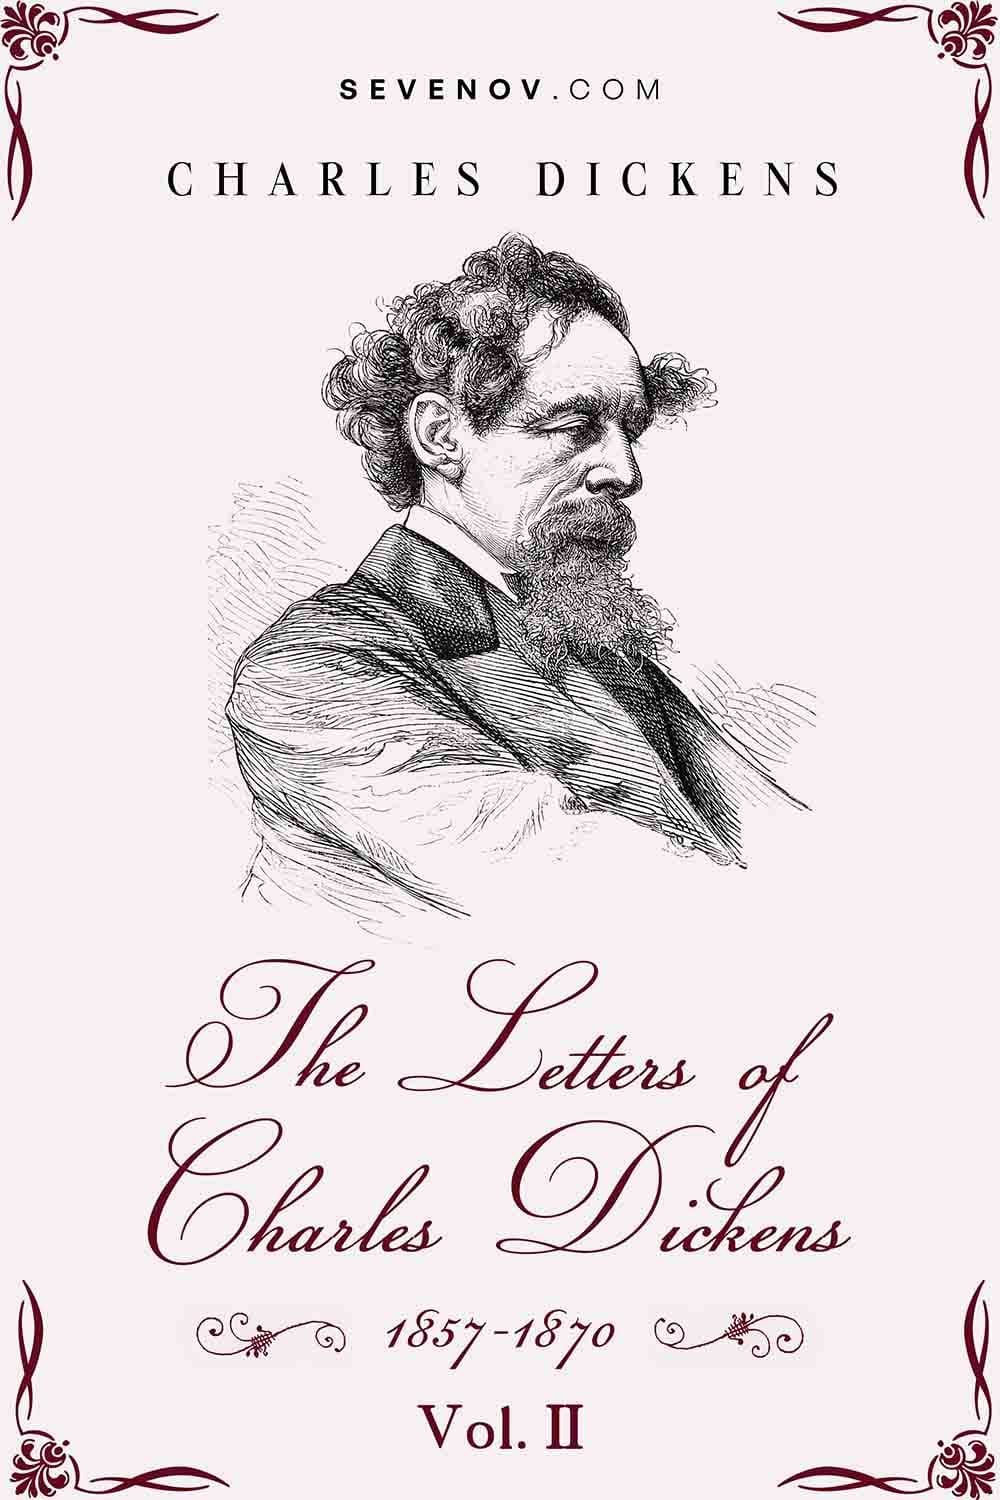 https://pagevio.com/wp-content/uploads/2023/01/the-letters-of-charles-dickens-vol-2-1857-1870-20220901.jpg